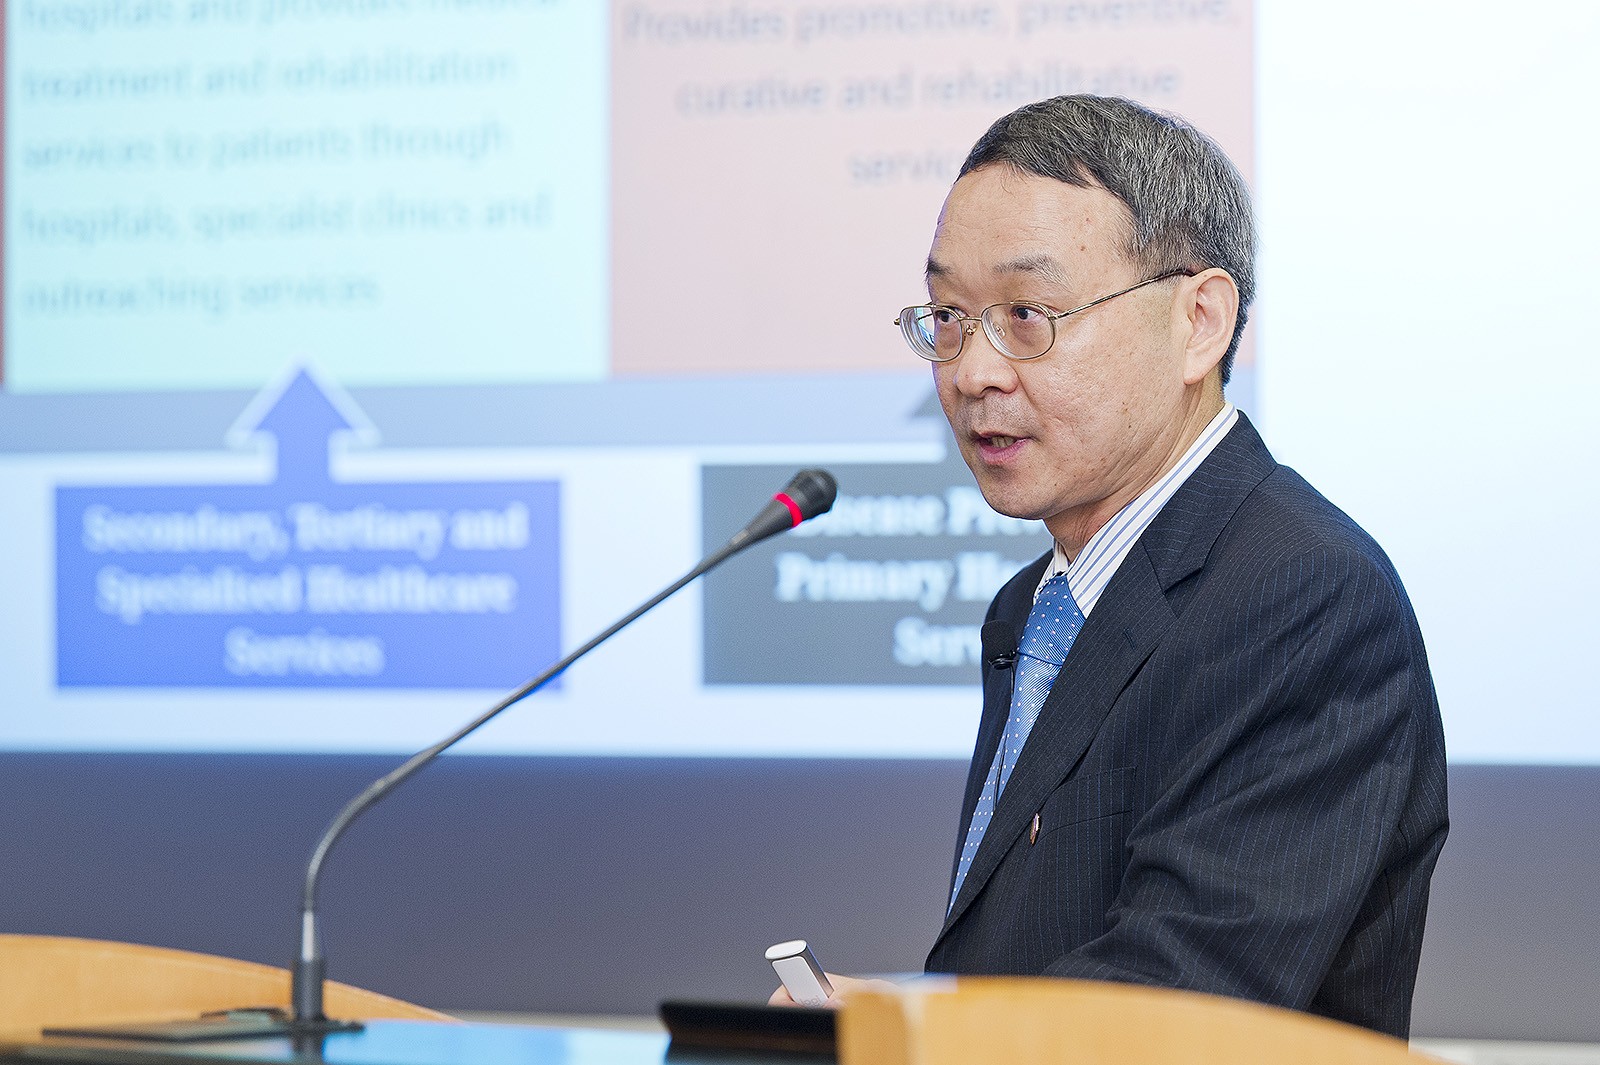 Professor Frank Chen discussed the future of healthcare for Hong Kong and other communities in terms of a comprehensive action plan that involves more than merely finding more bed spaces and hiring more medical staff.